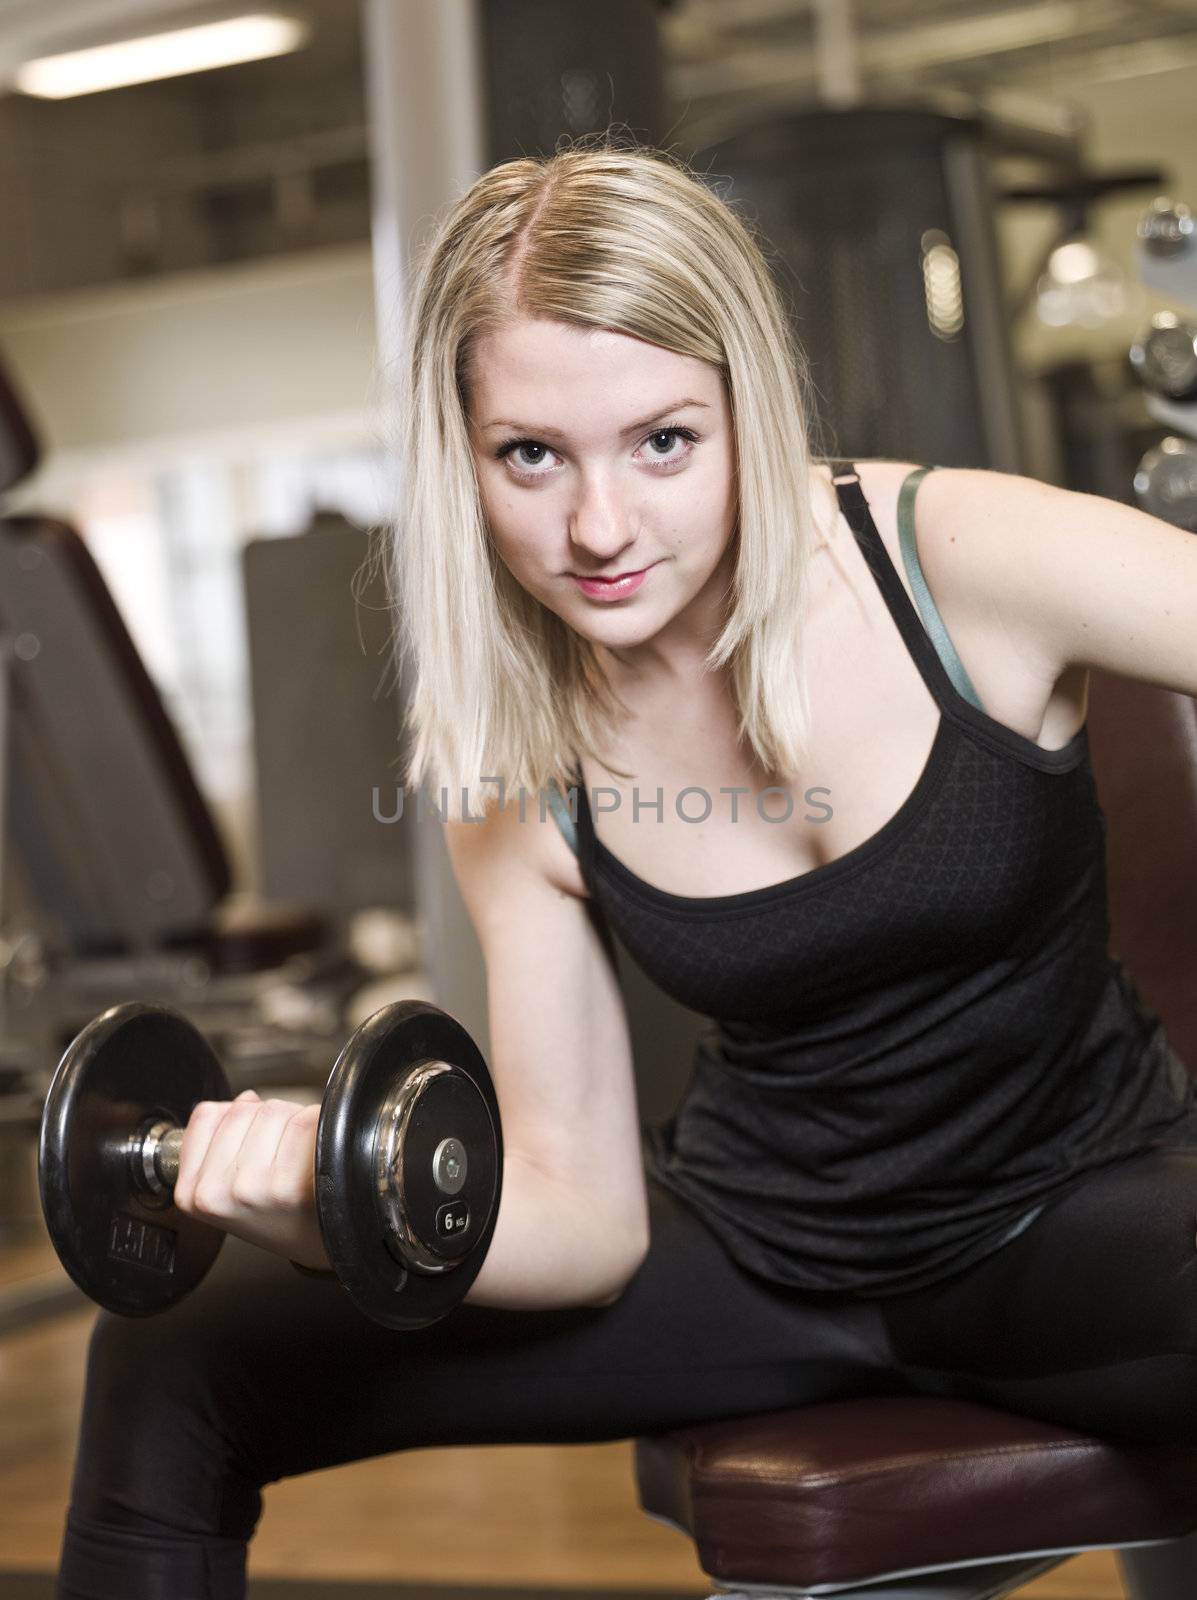 Young woman lifting weights by gemenacom